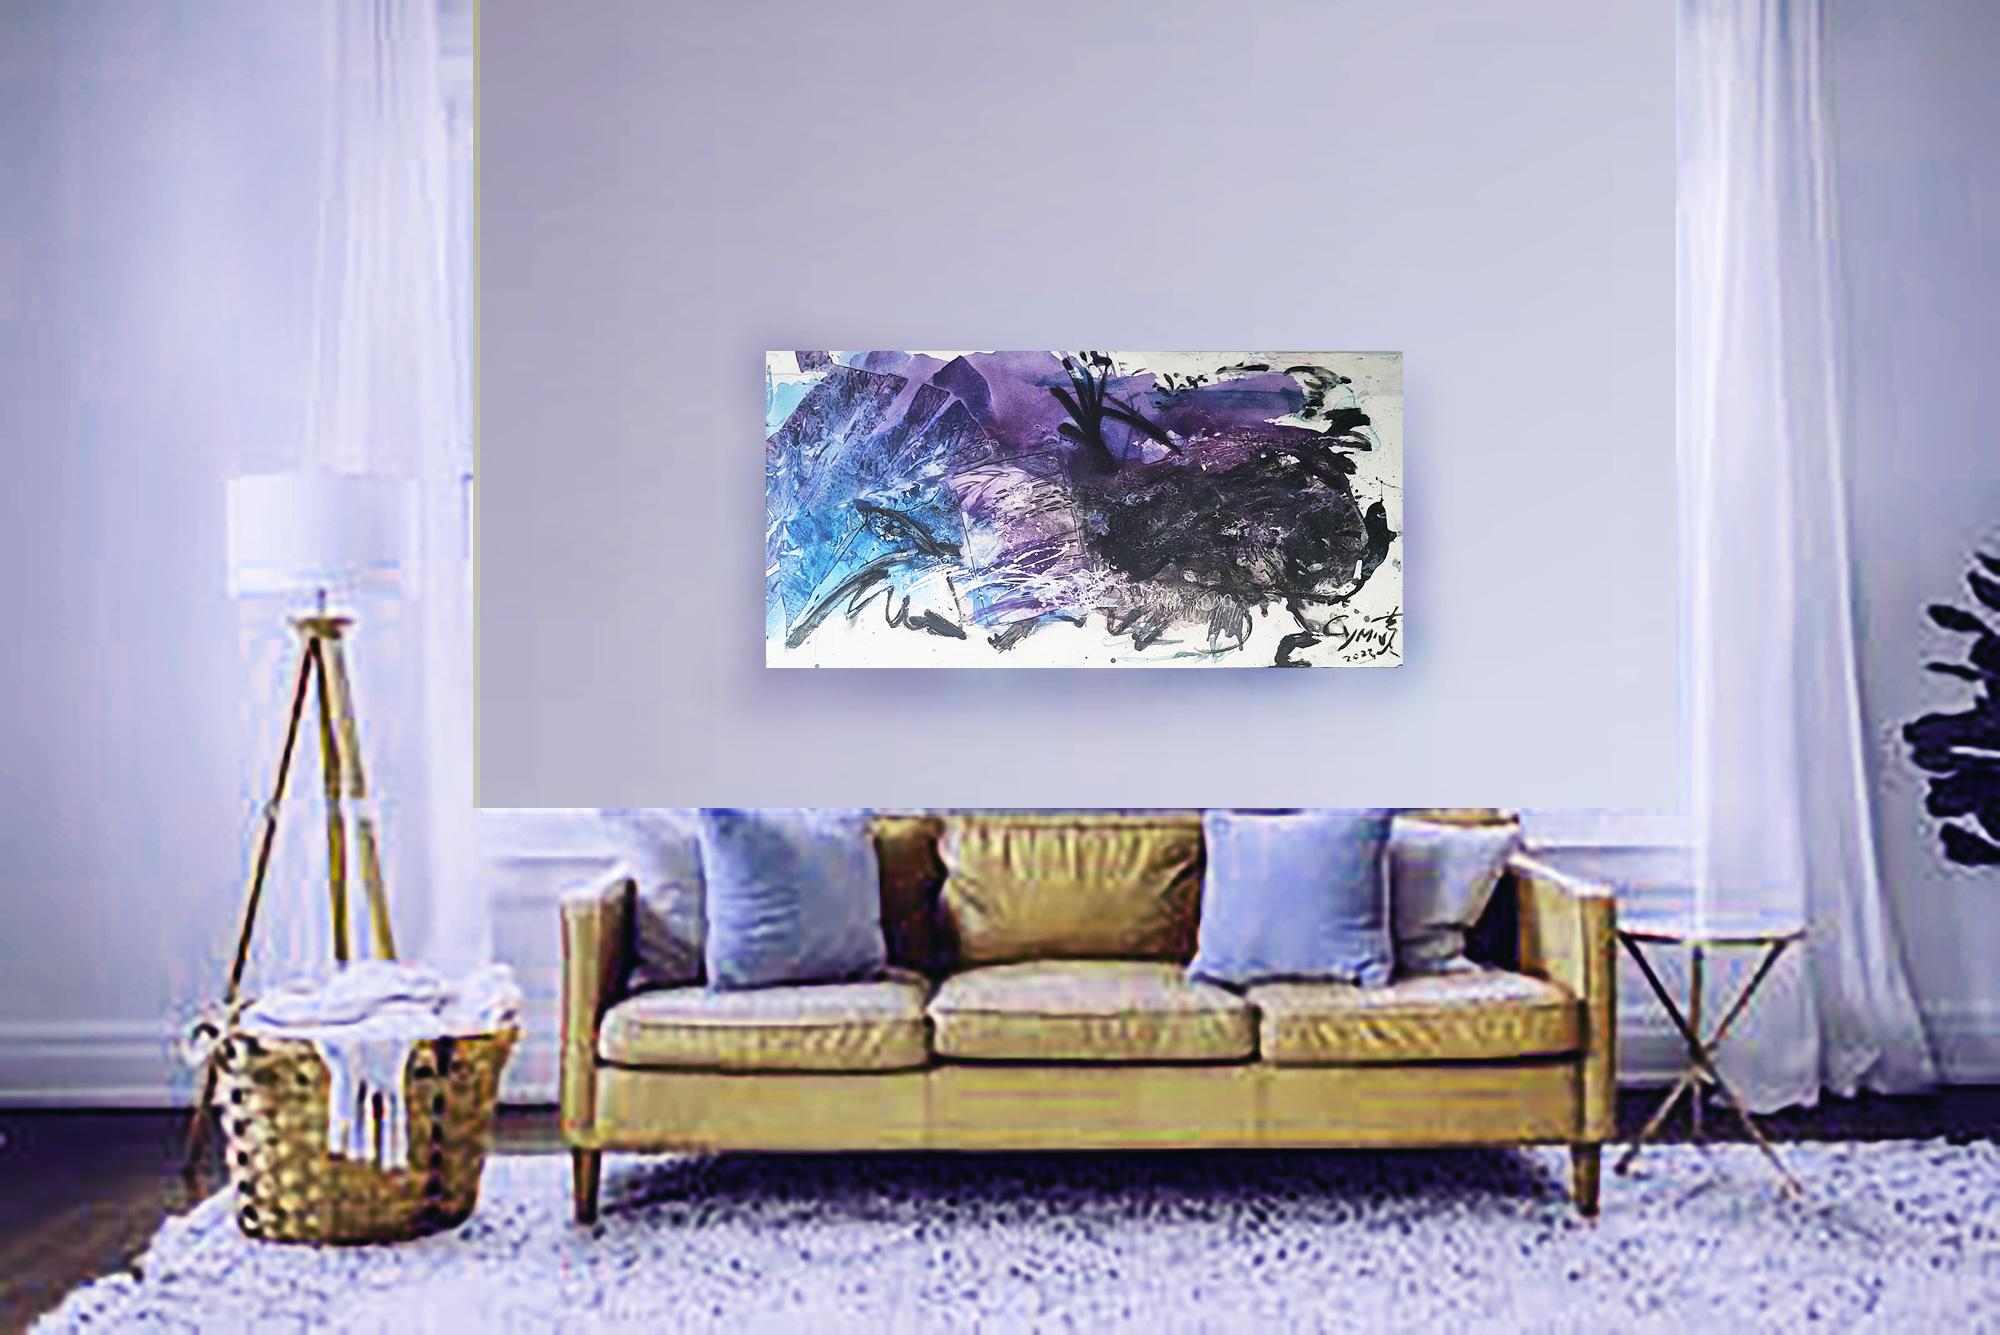 Space, beyond Faraway VII - Abstract Expressionist Painting by Cymn Wong 